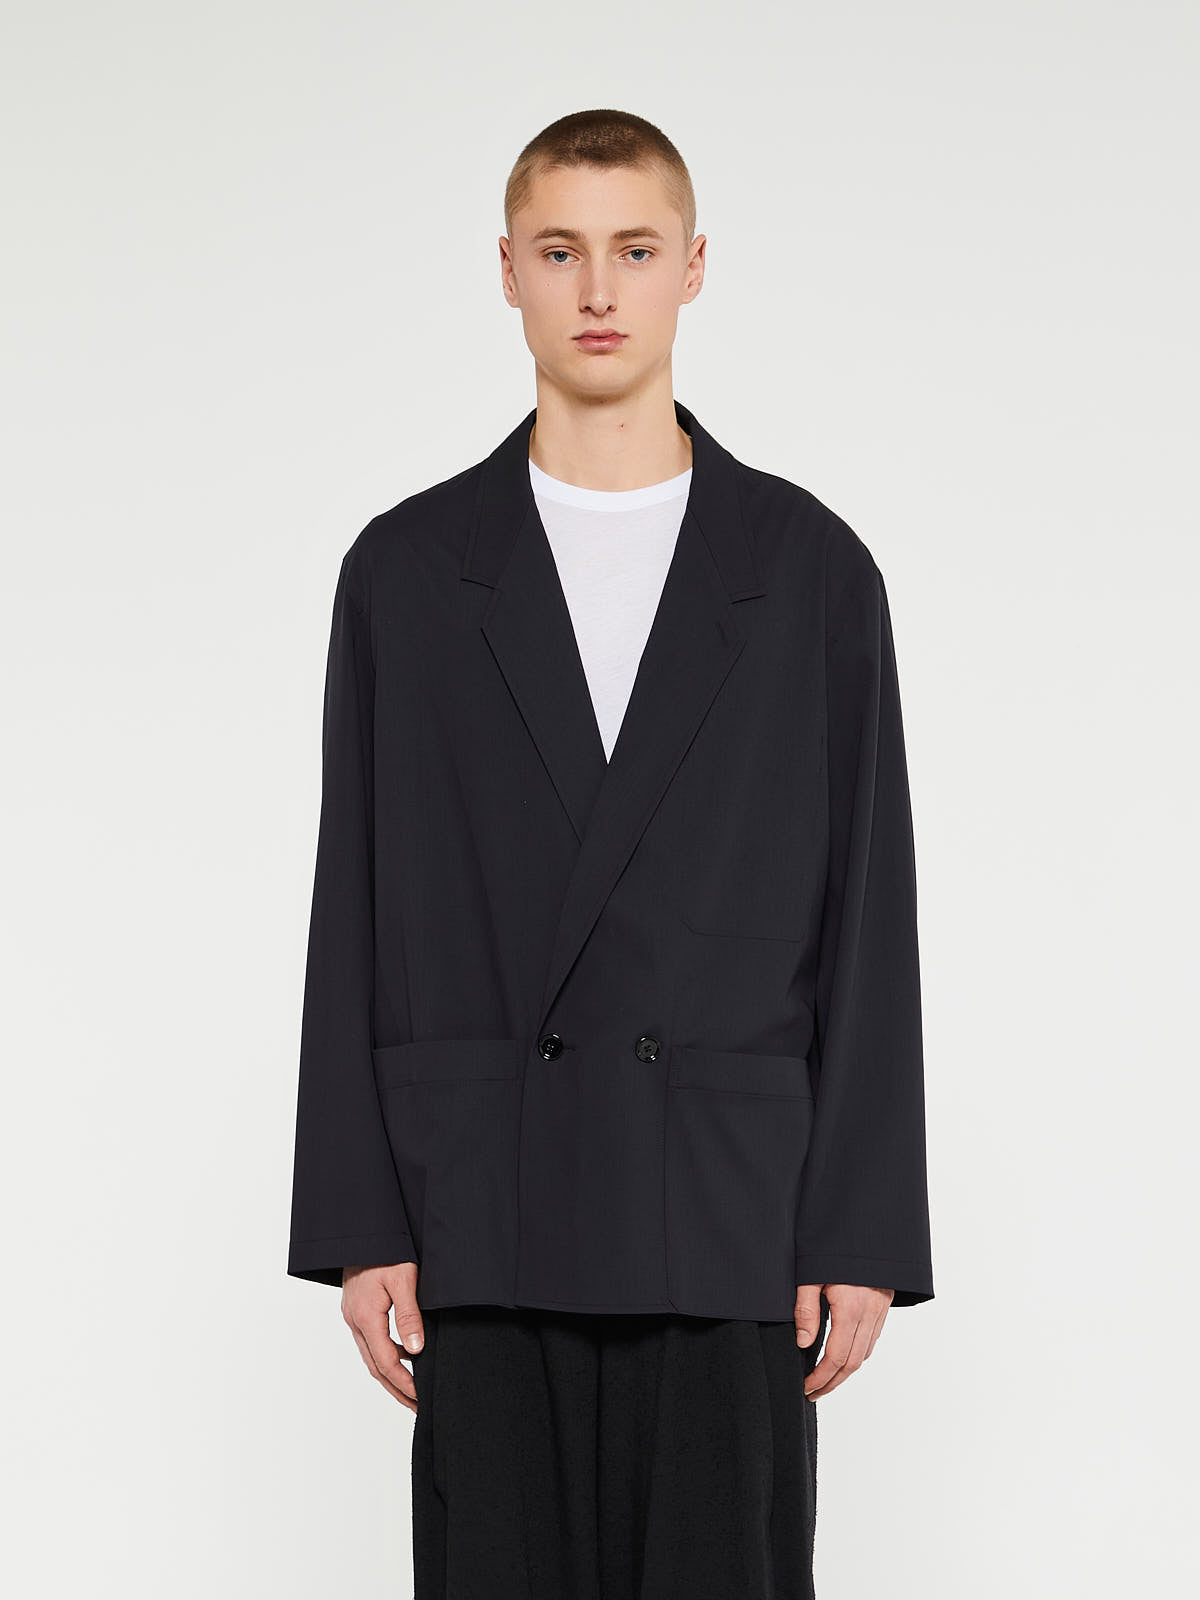 Double Breasted Workwear Jacket in Jet Black